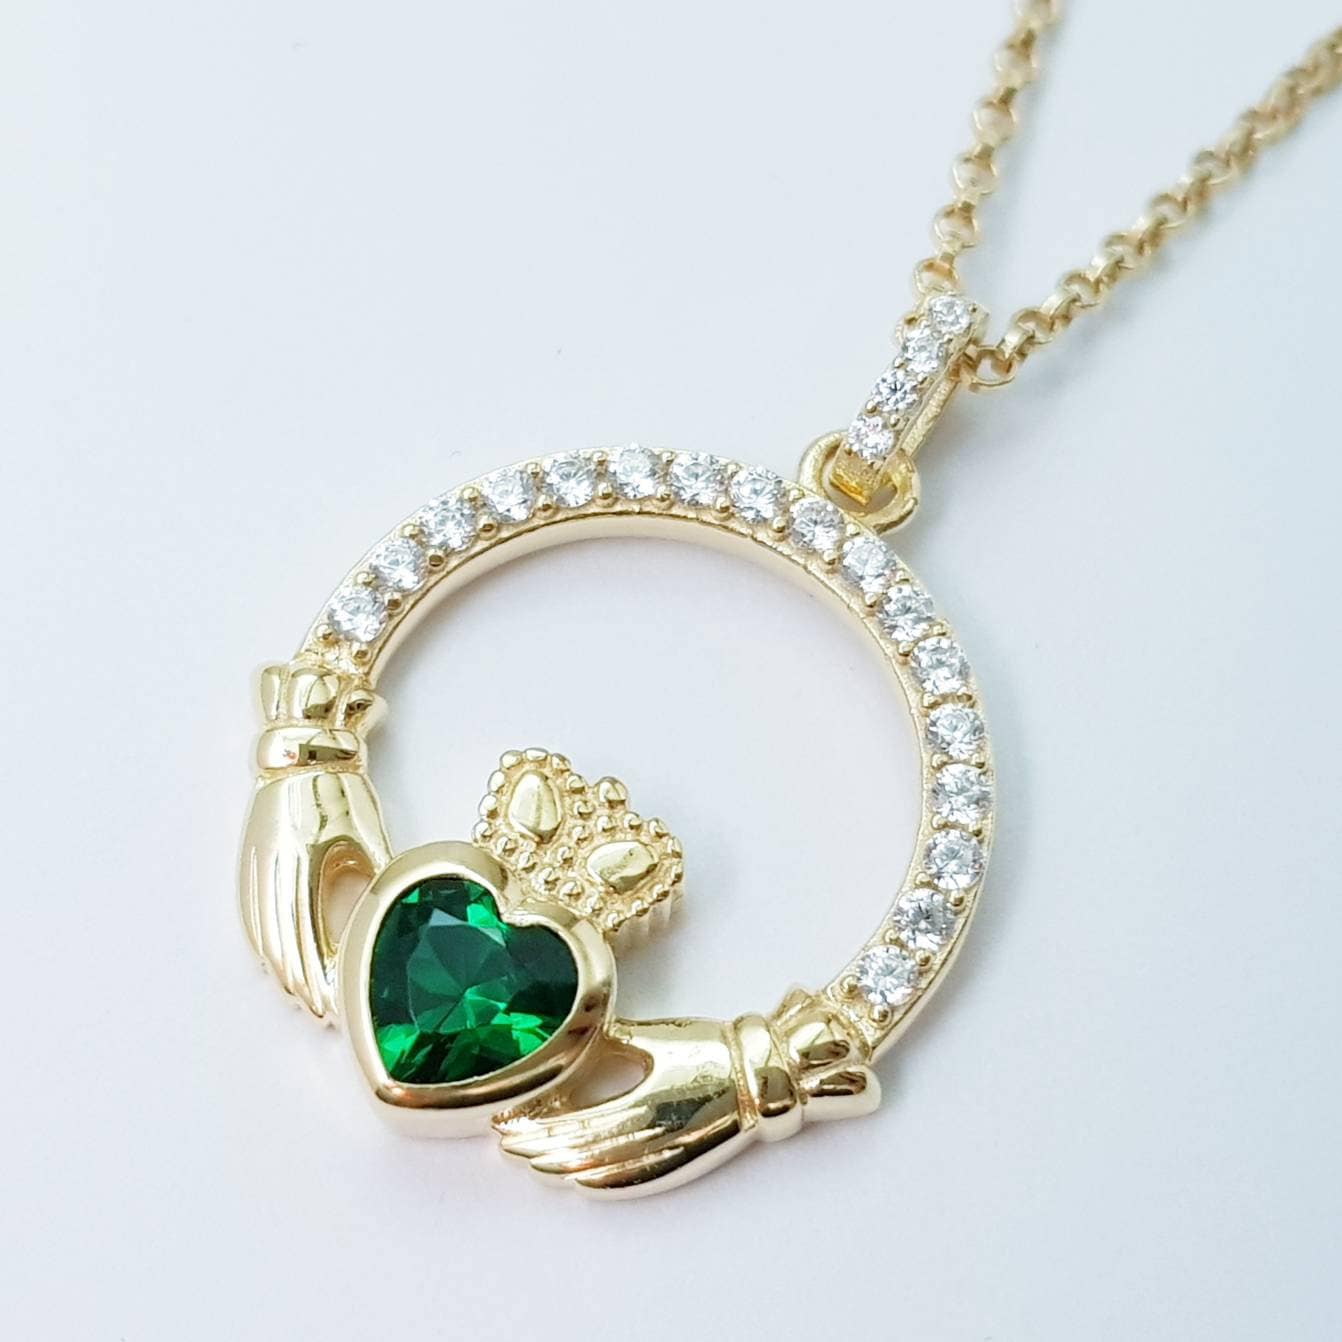 Green Claddagh pendant, claddagh necklace, yellow gold claddagh pendant